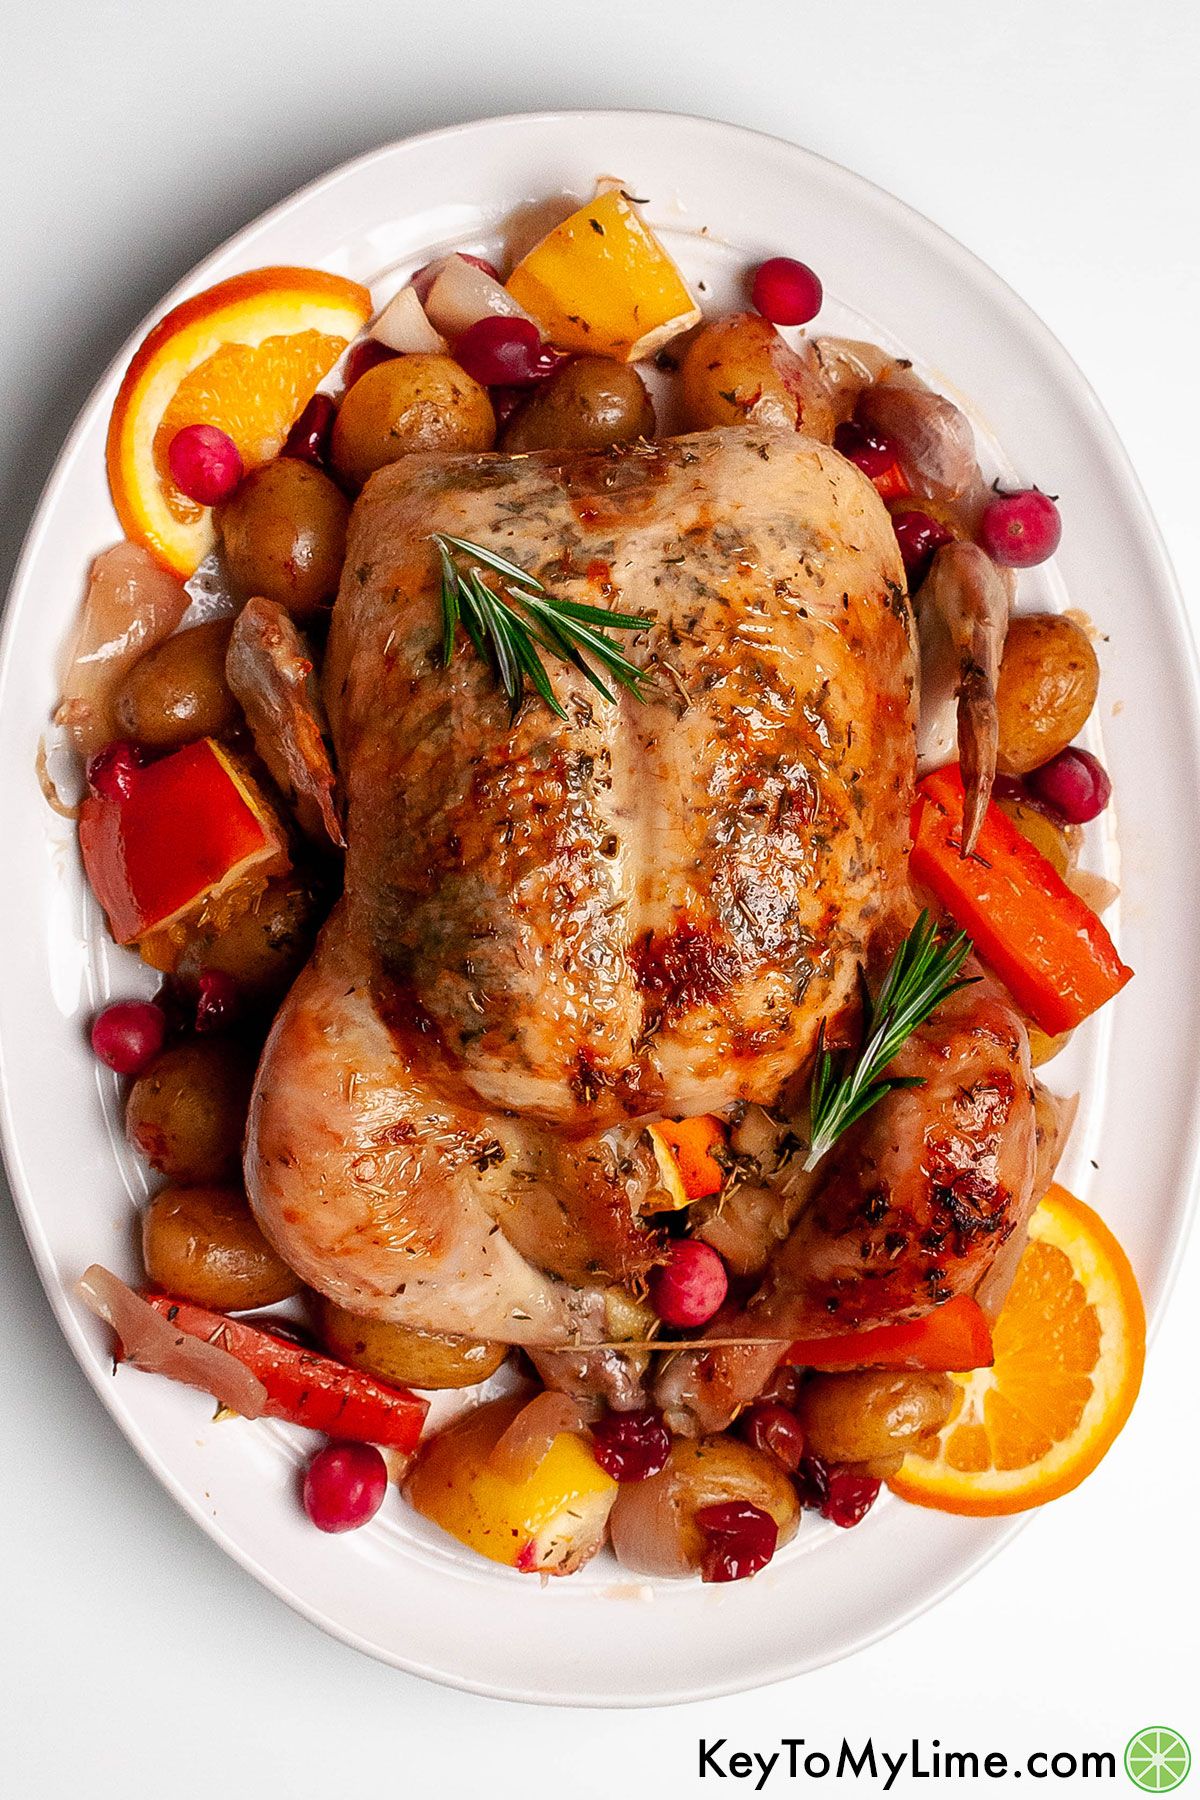 Roasted chicken on a platter with oranges, potatoes, cranberries, and carrots.